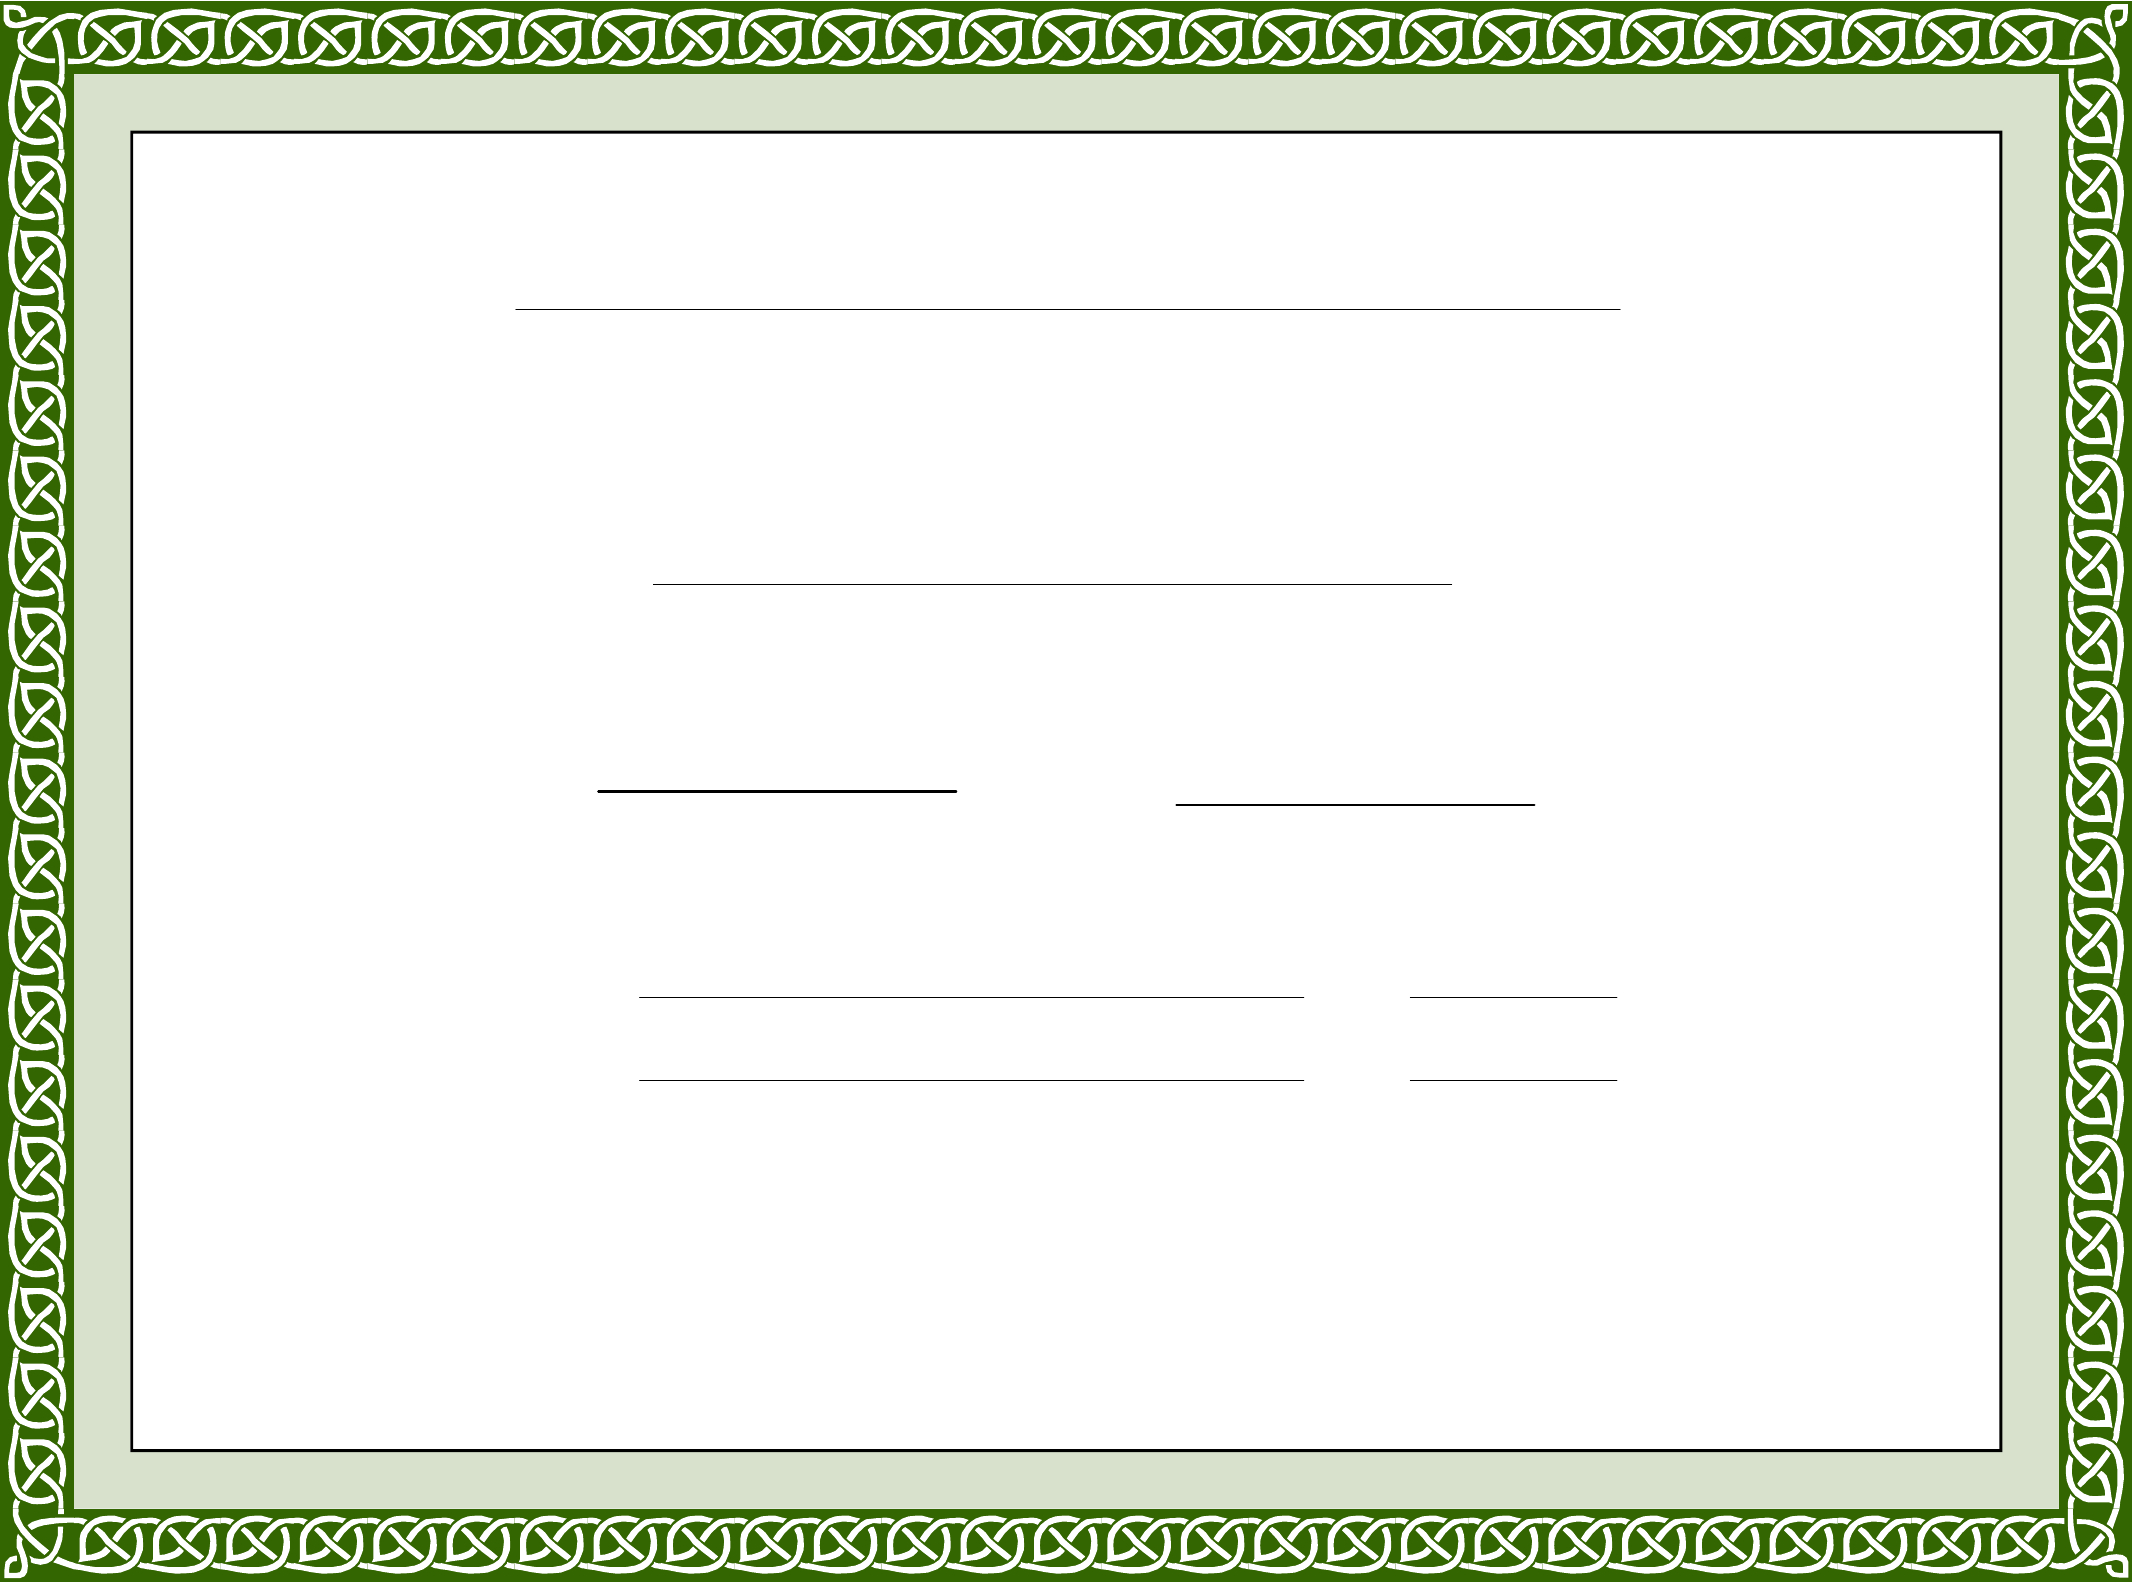 Sample Training Completion Certificate Template Free Download With Regard To Blank Certificate Templates Free Download